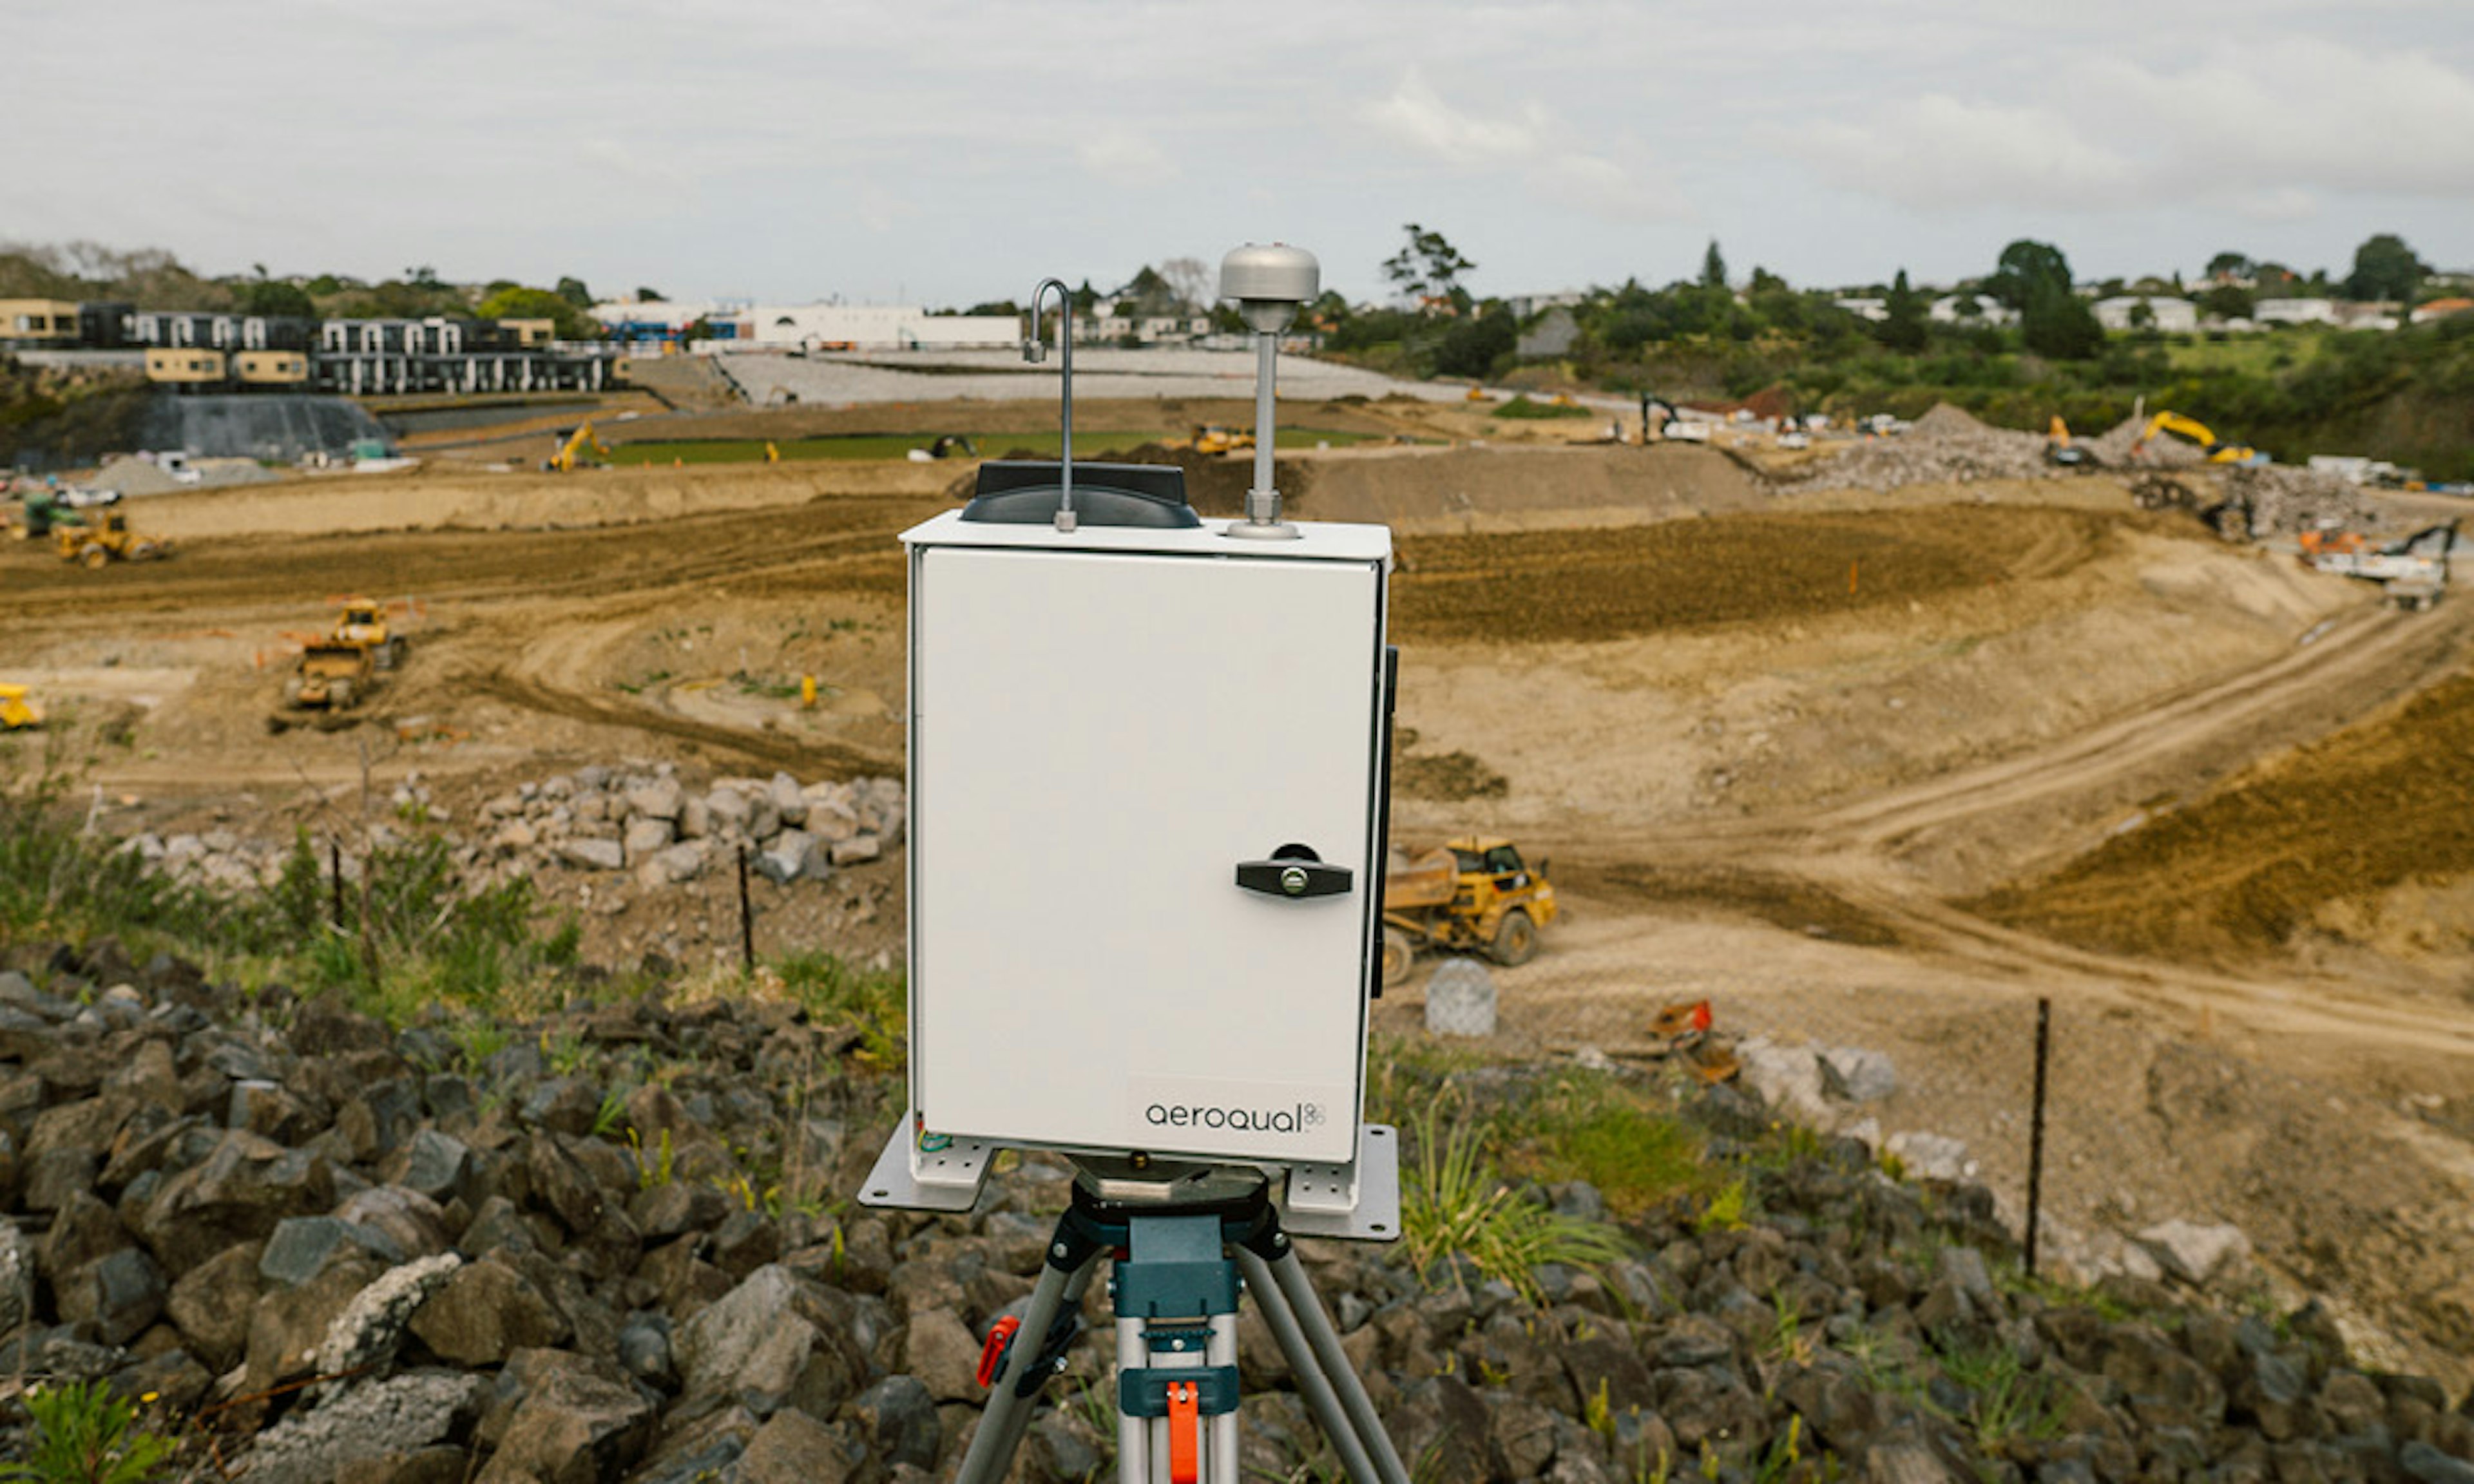 Next generation all-in-one air monitoring solution, purpose-built for outdoors.